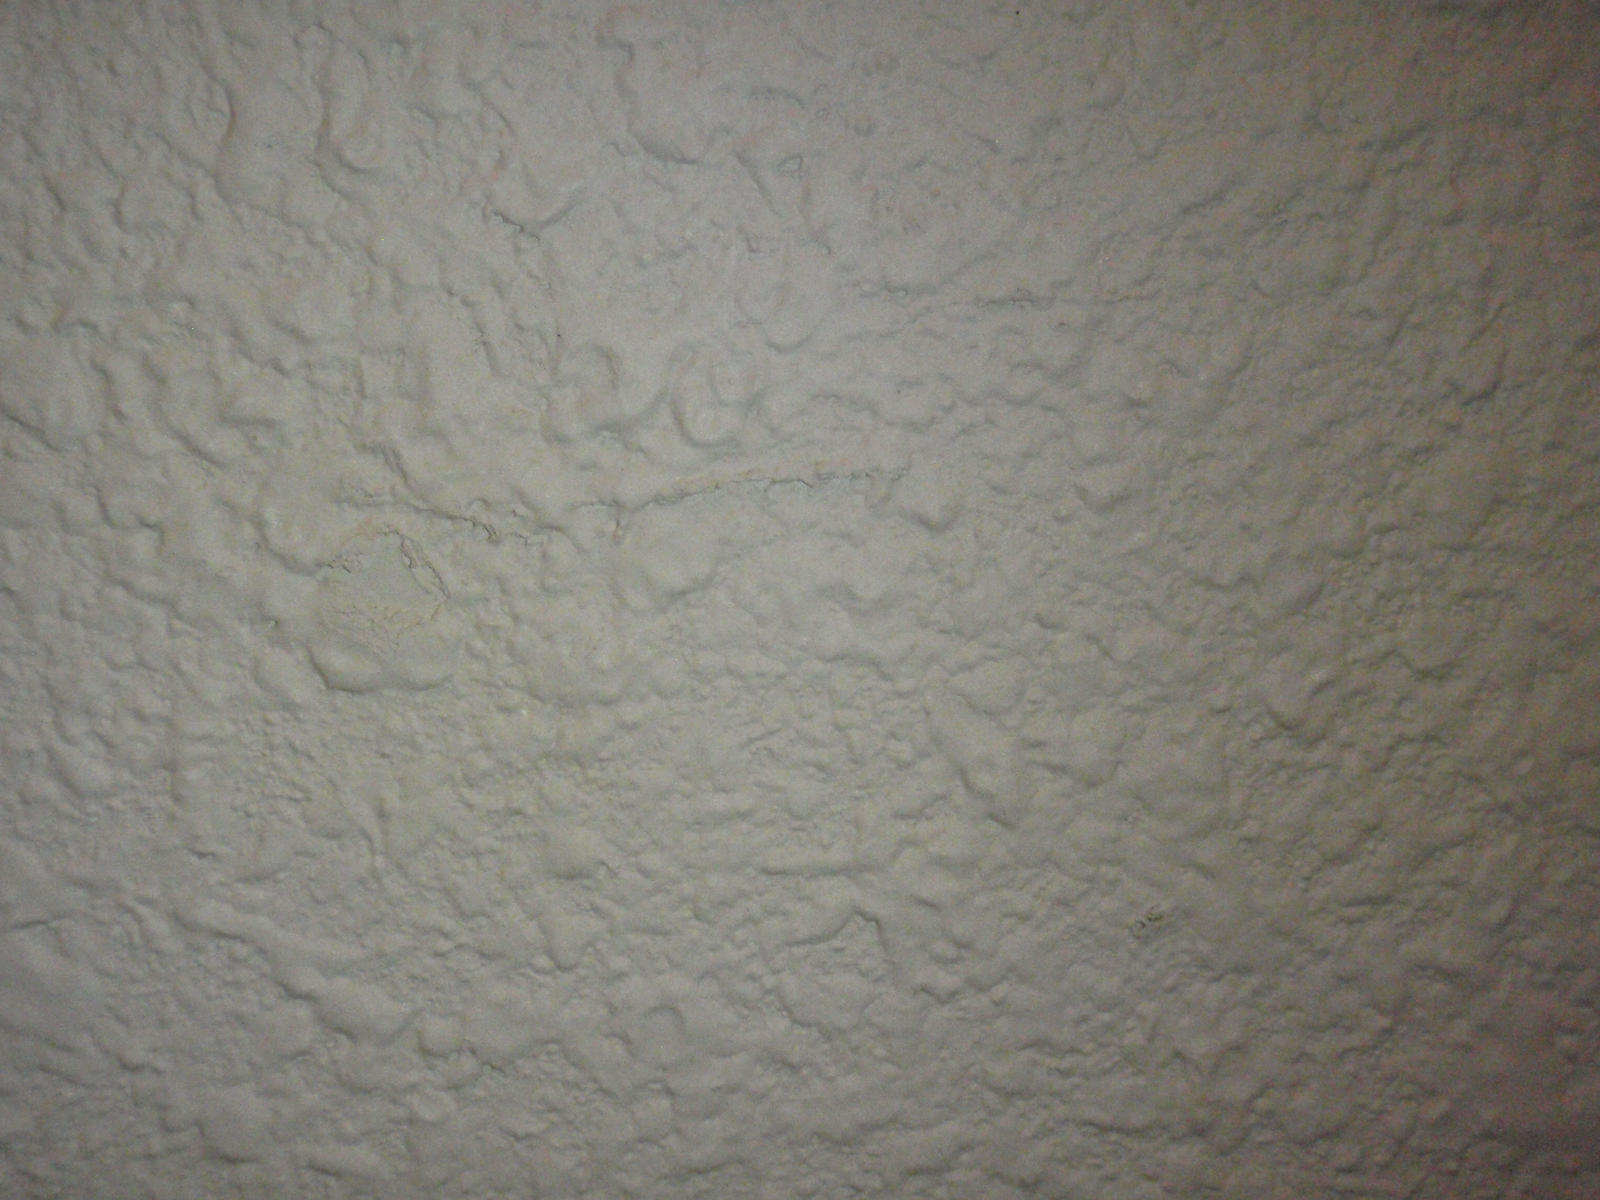 Ceilings - Texturing - Find General Contractors, Home Remodeling